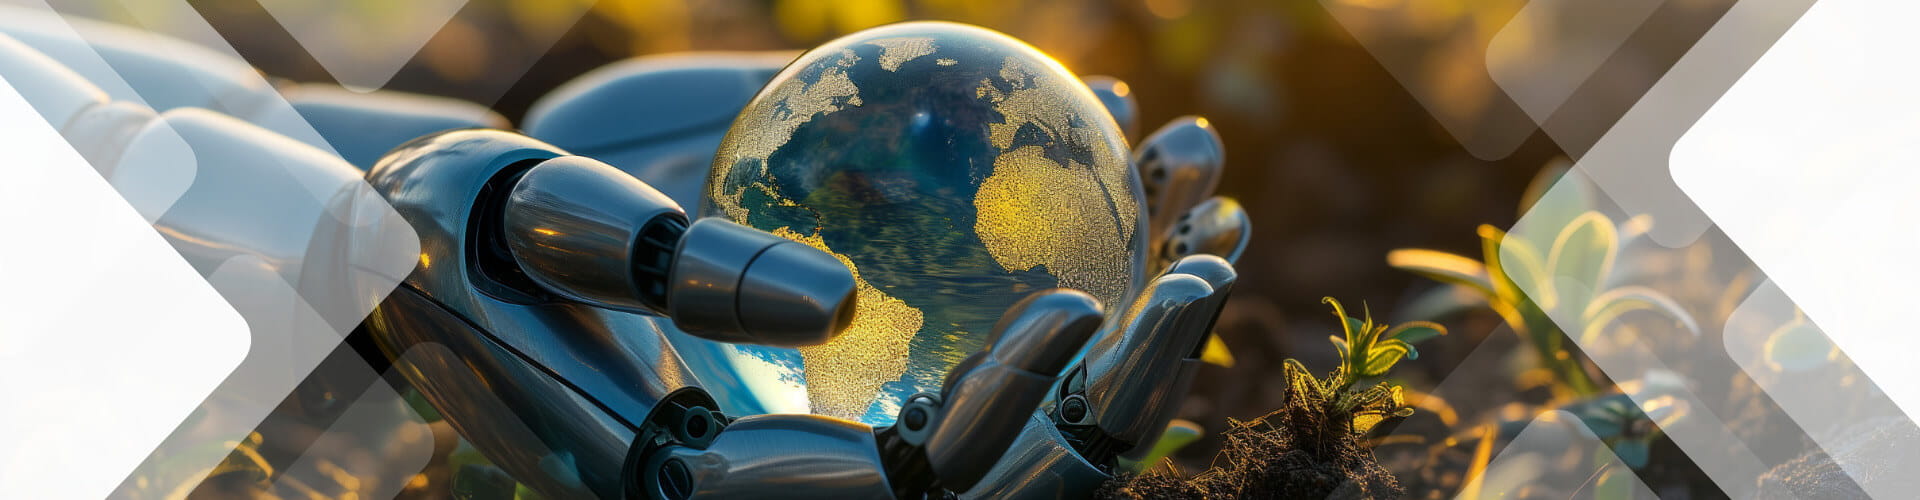 An image of a robot holding a globe.